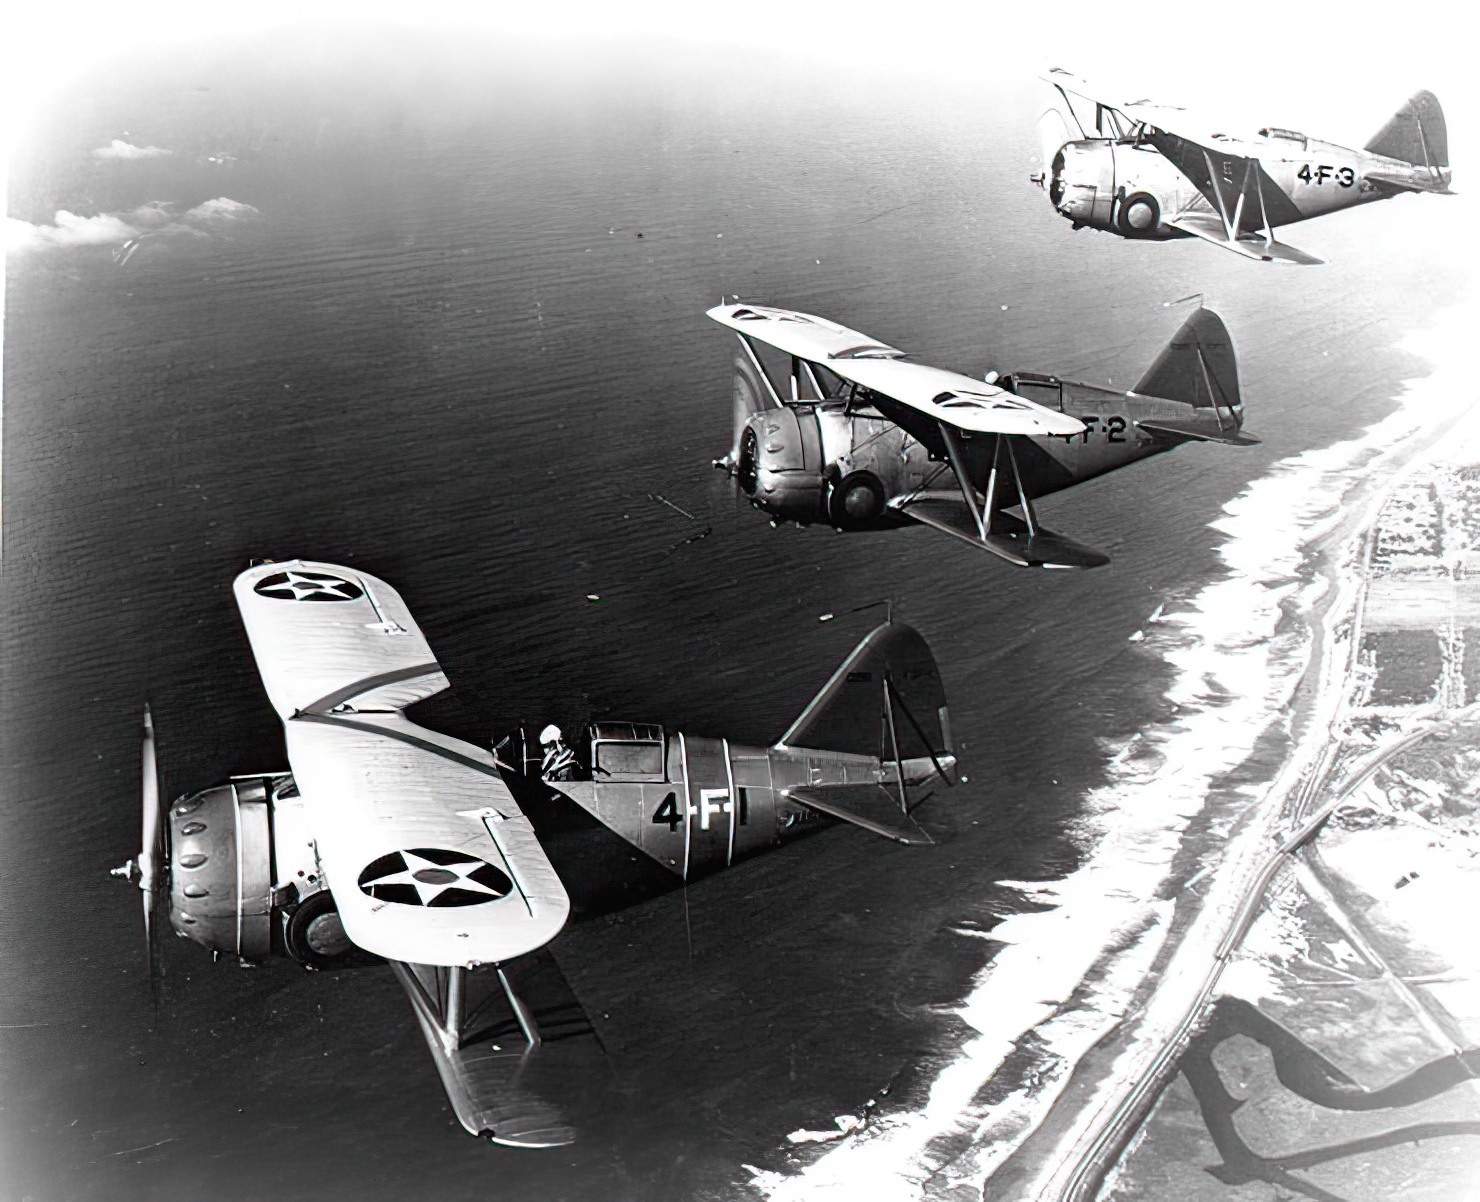 Three Grumman F3F-1 fighters of U.S. Navy fighter squadron VF-4 from the aircraft carrier USS Ranger (CV-4) over Southern California, January 1939